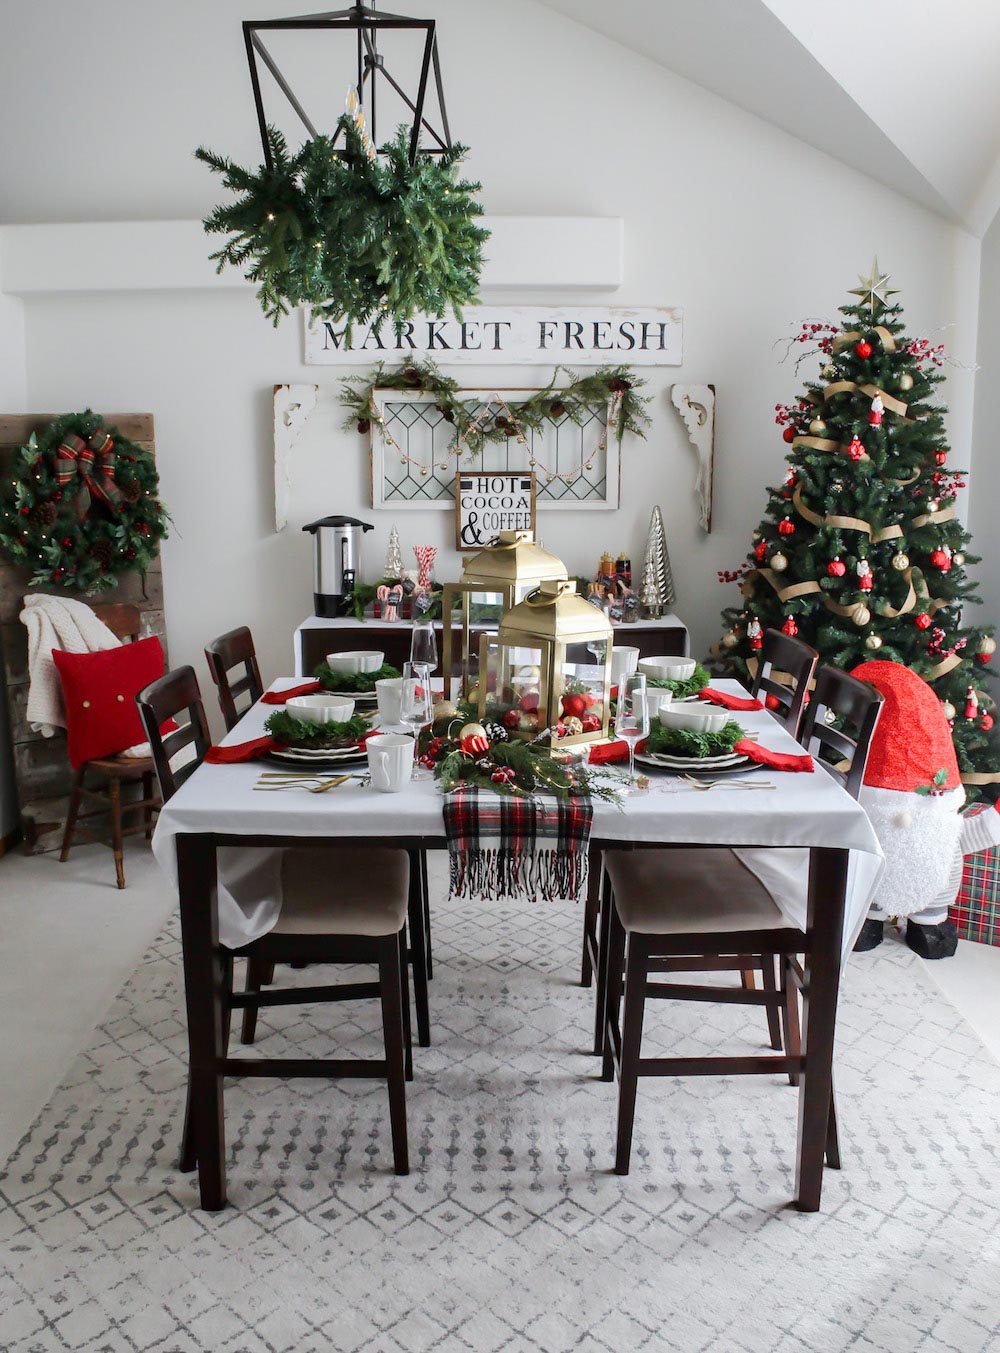 Creating a Festive Holiday Brunch